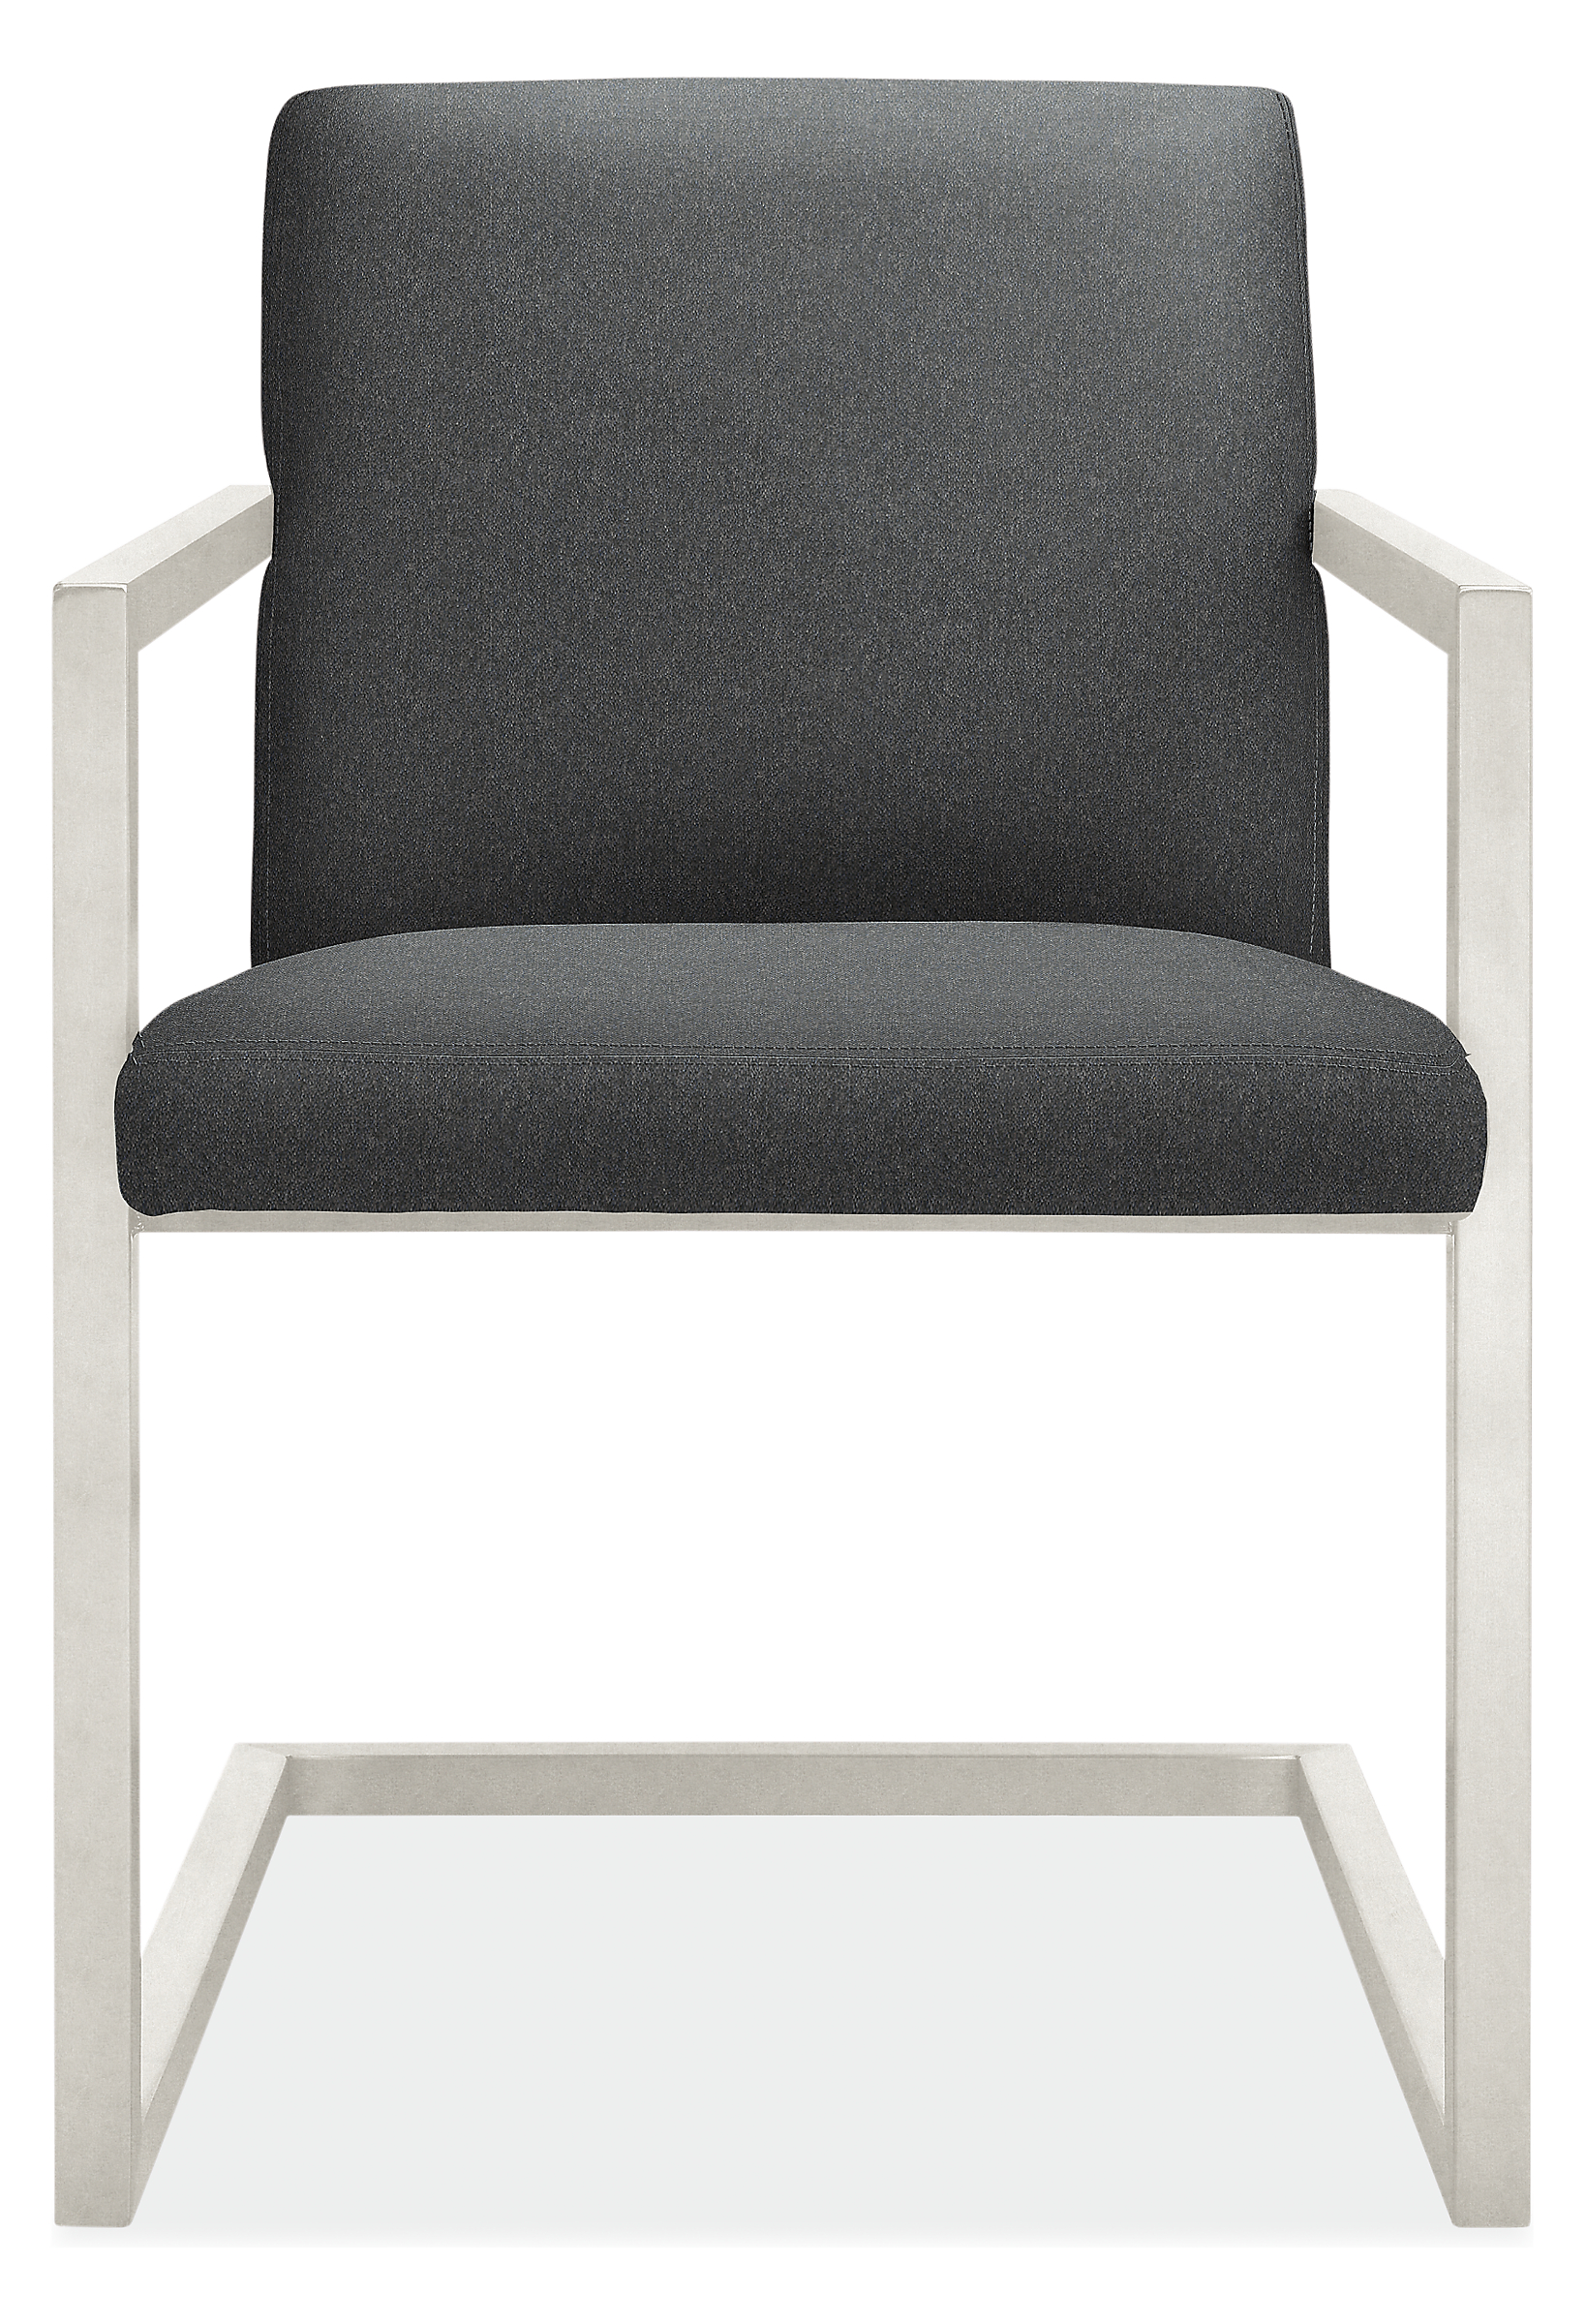 Front view of Lira Dining Chair in Flint Fabric.